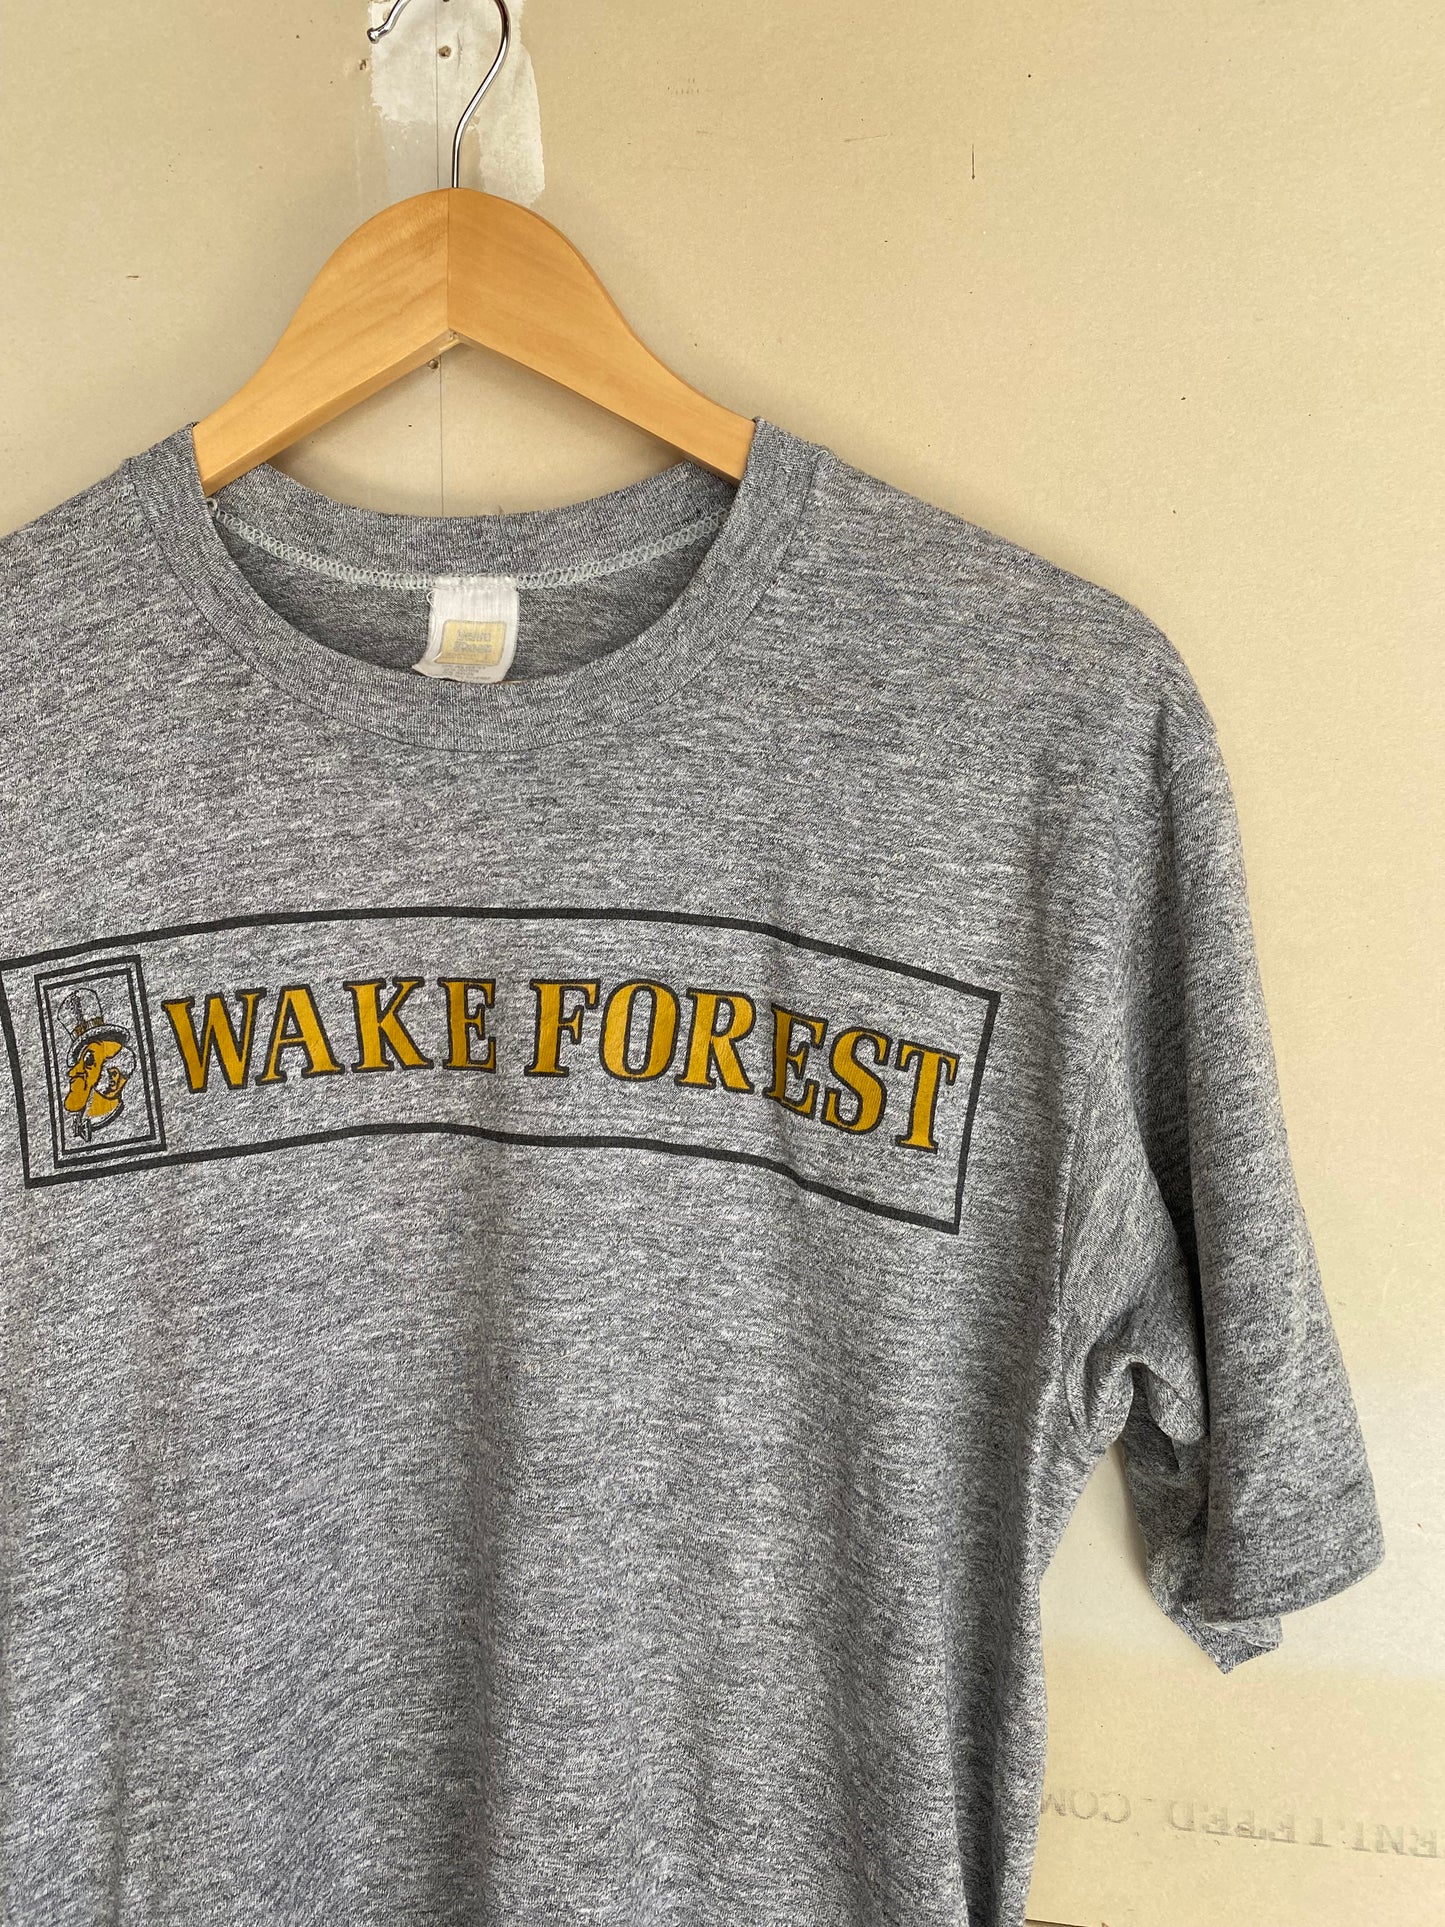 1970s Wake Forest Tee | L